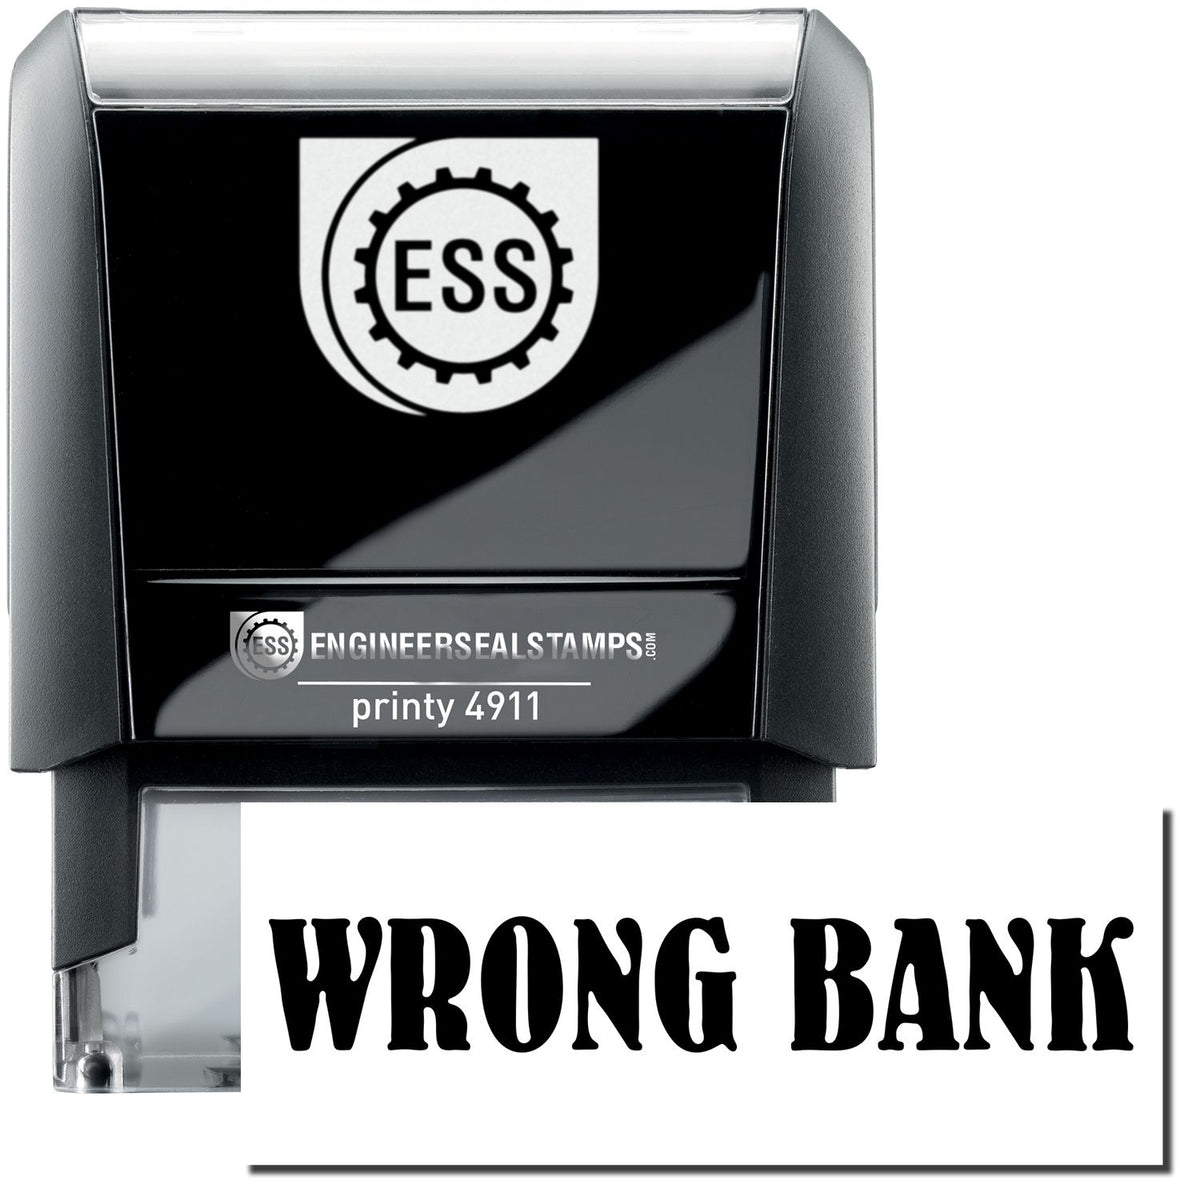 A self-inking stamp with a stamped image showing how the text &quot;WRONG BANK&quot; is displayed after stamping.